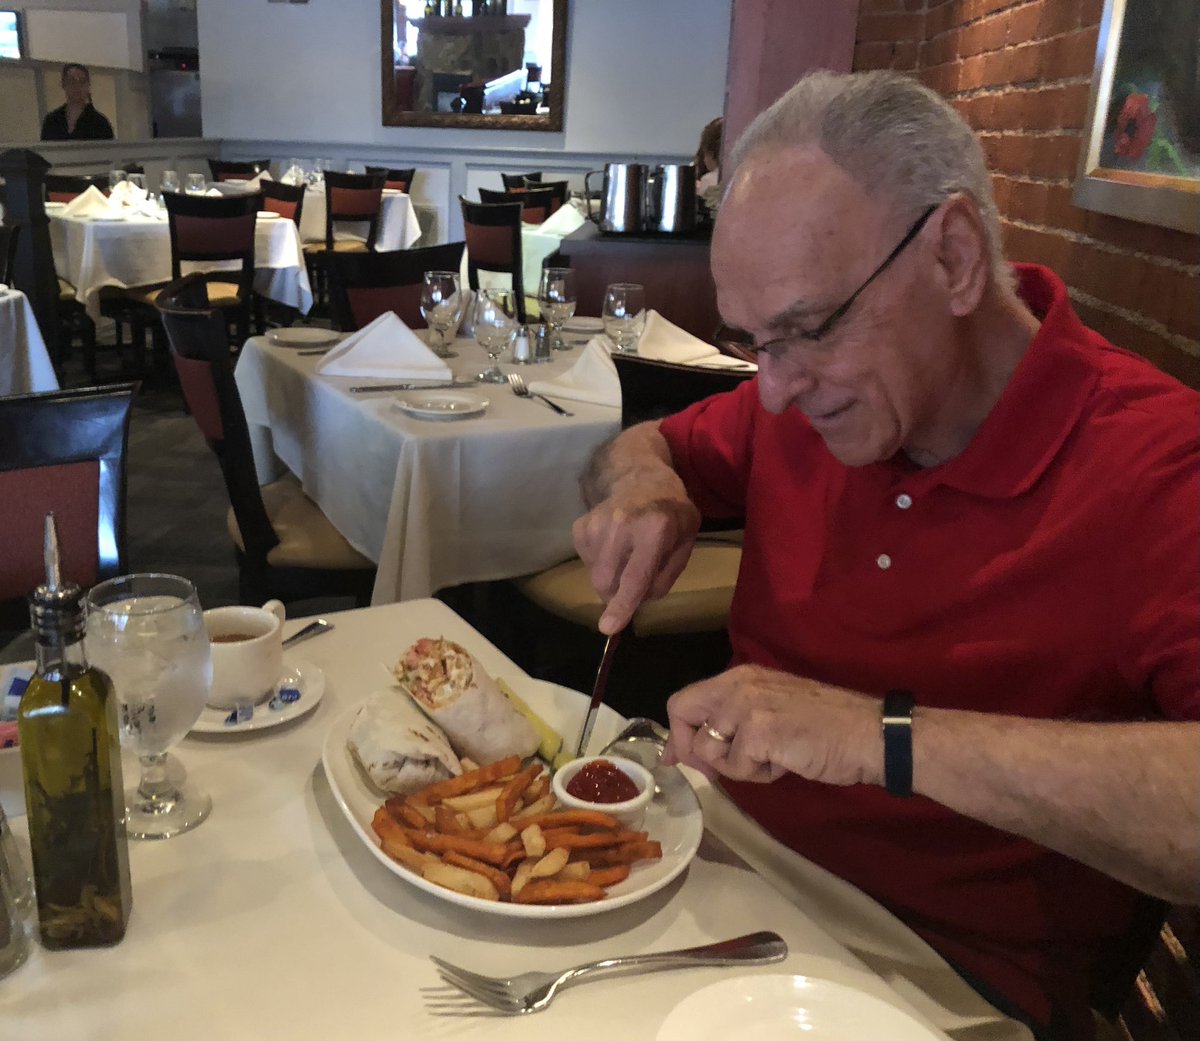 Lunch with the best guy I’ve ever known. Happy as could be with his Buffalo chicken wrap and mix of sweet potato and regular fries. #MyDad #LuckySon